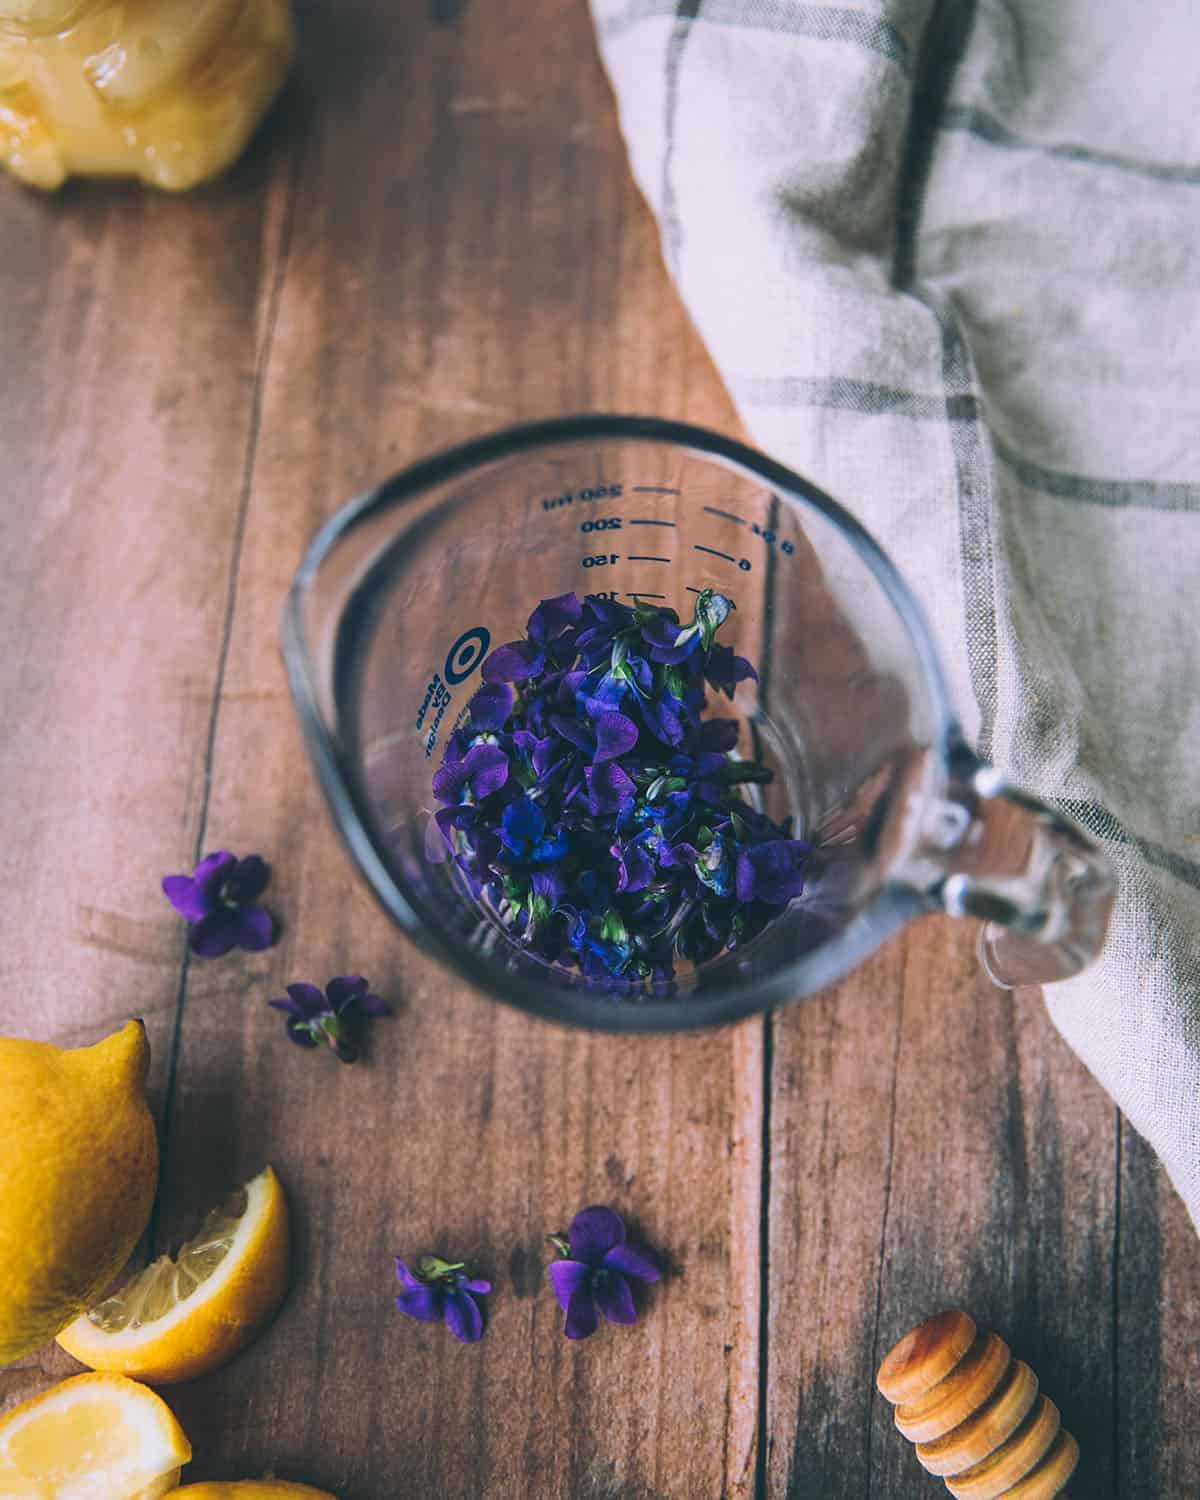 A glass pyrex measuring cup with a wild violet flowers in it, on a dark wood surface surrounded with violet flowers and a lemon. Top view.